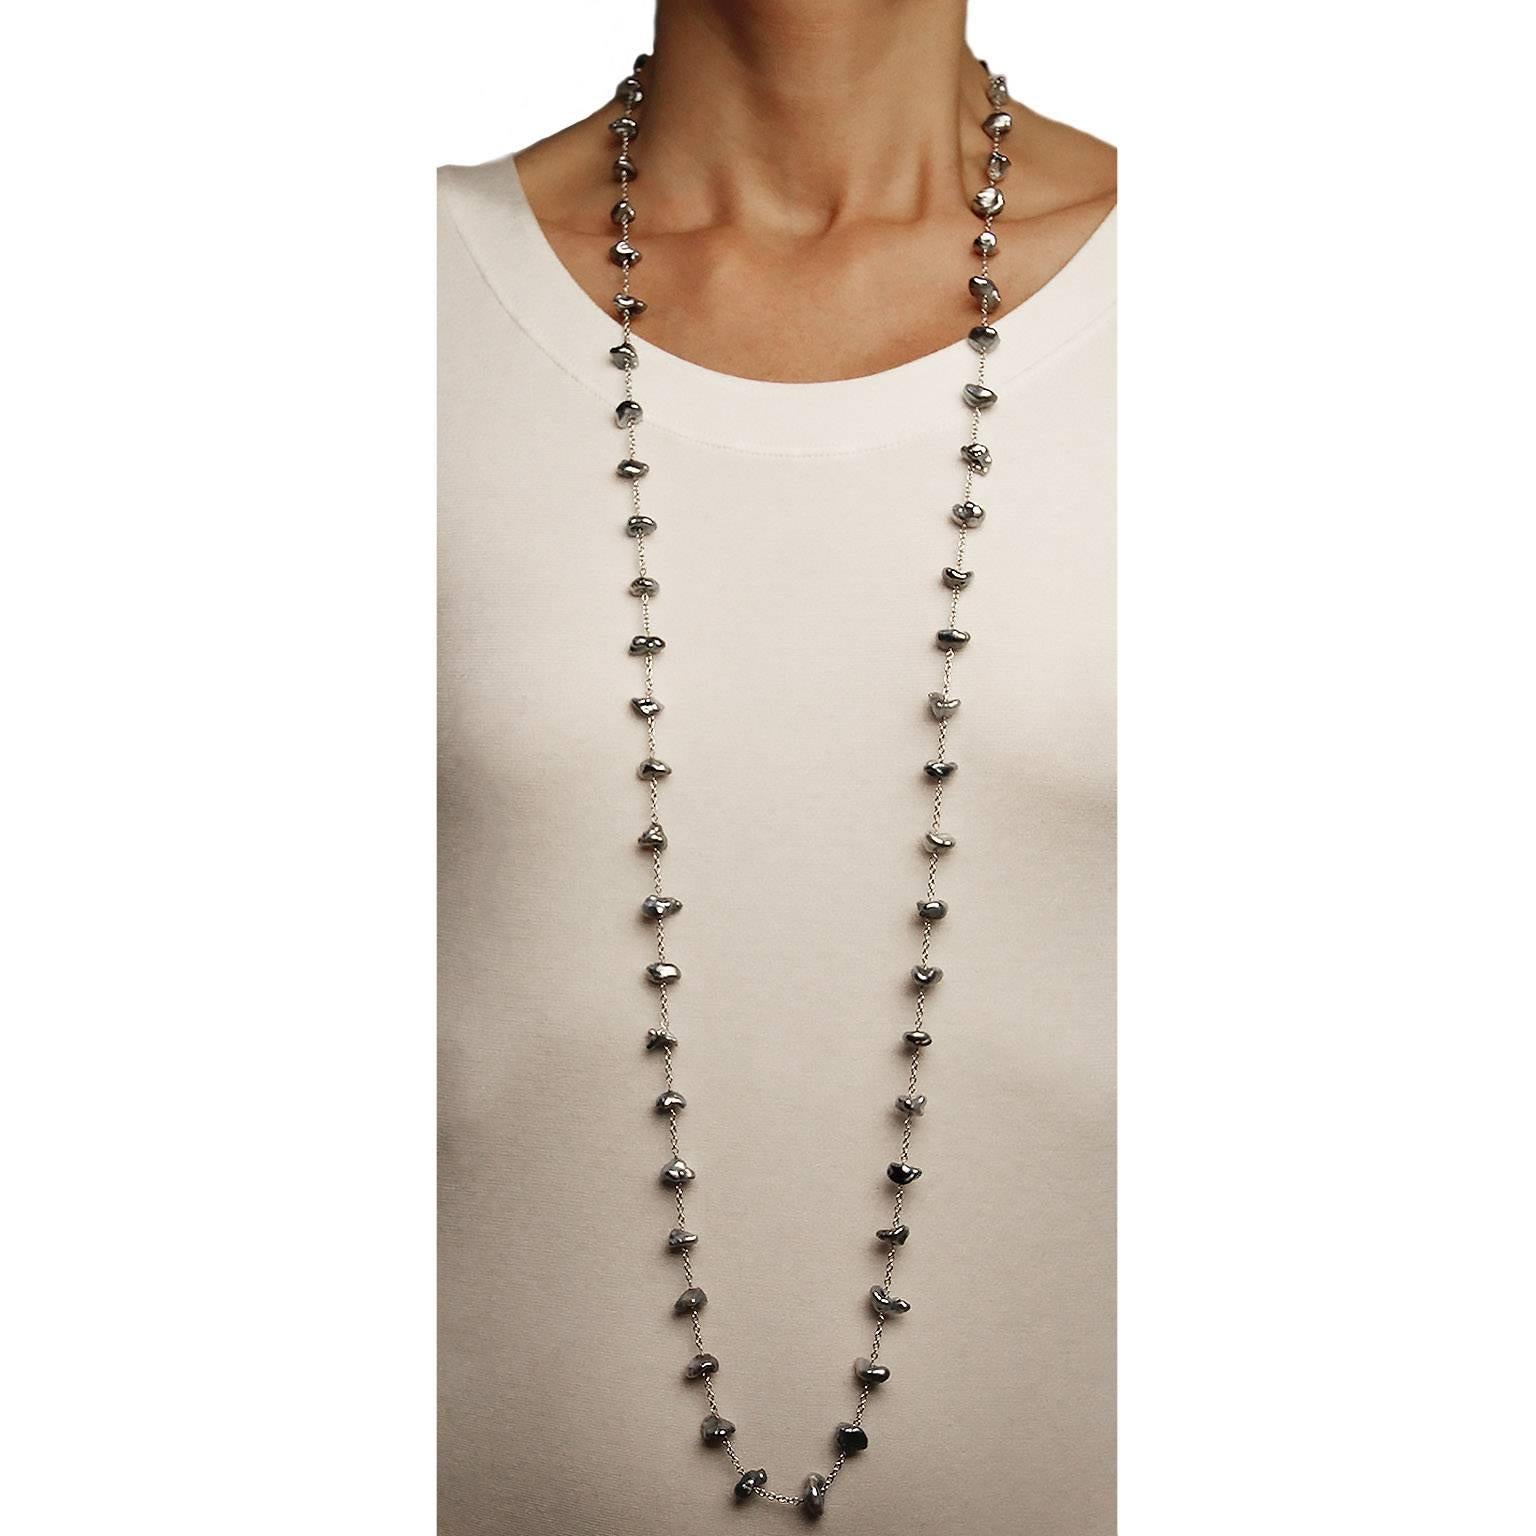 Jona design collection, hand crafted in Italy, 18 karat white gold, 51.18 in /130 cm long sautoir necklace featuring 59 keshi light grey Tahiti pearls.
All Jona jewelry is new and has never been previously owned or worn. Each item will arrive at